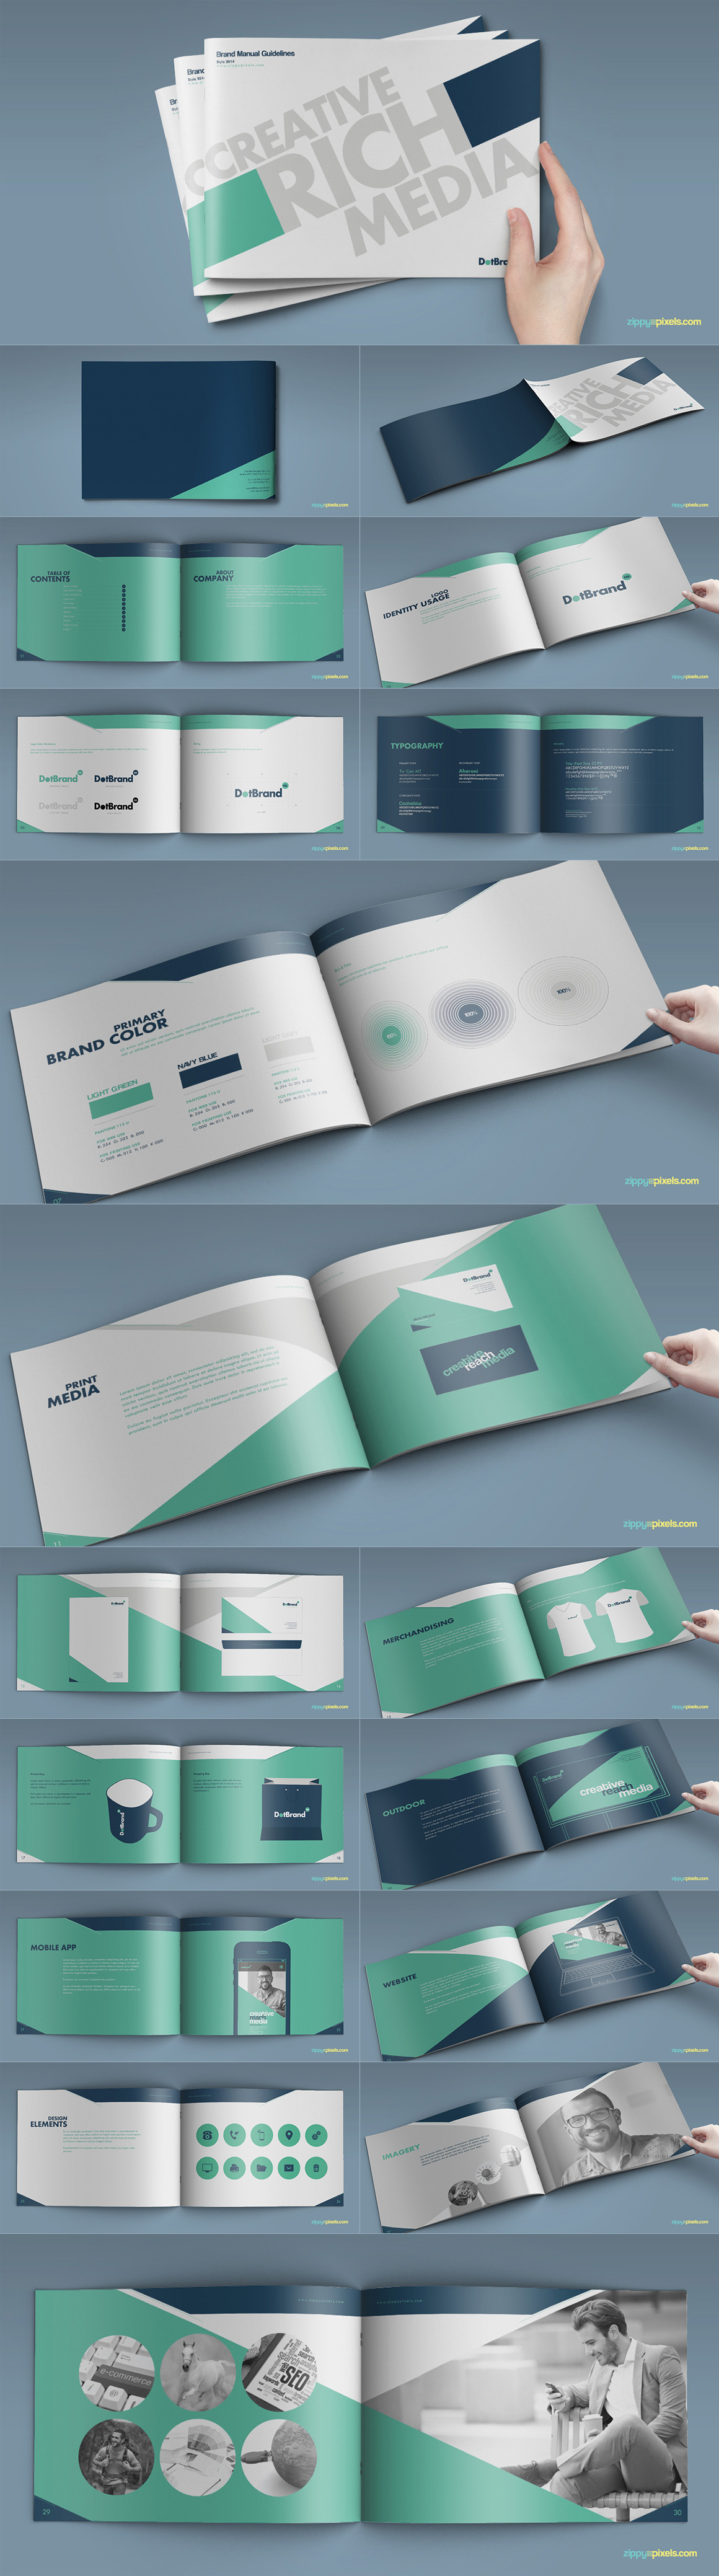 Style Guide Brand Book Templates Design Resources